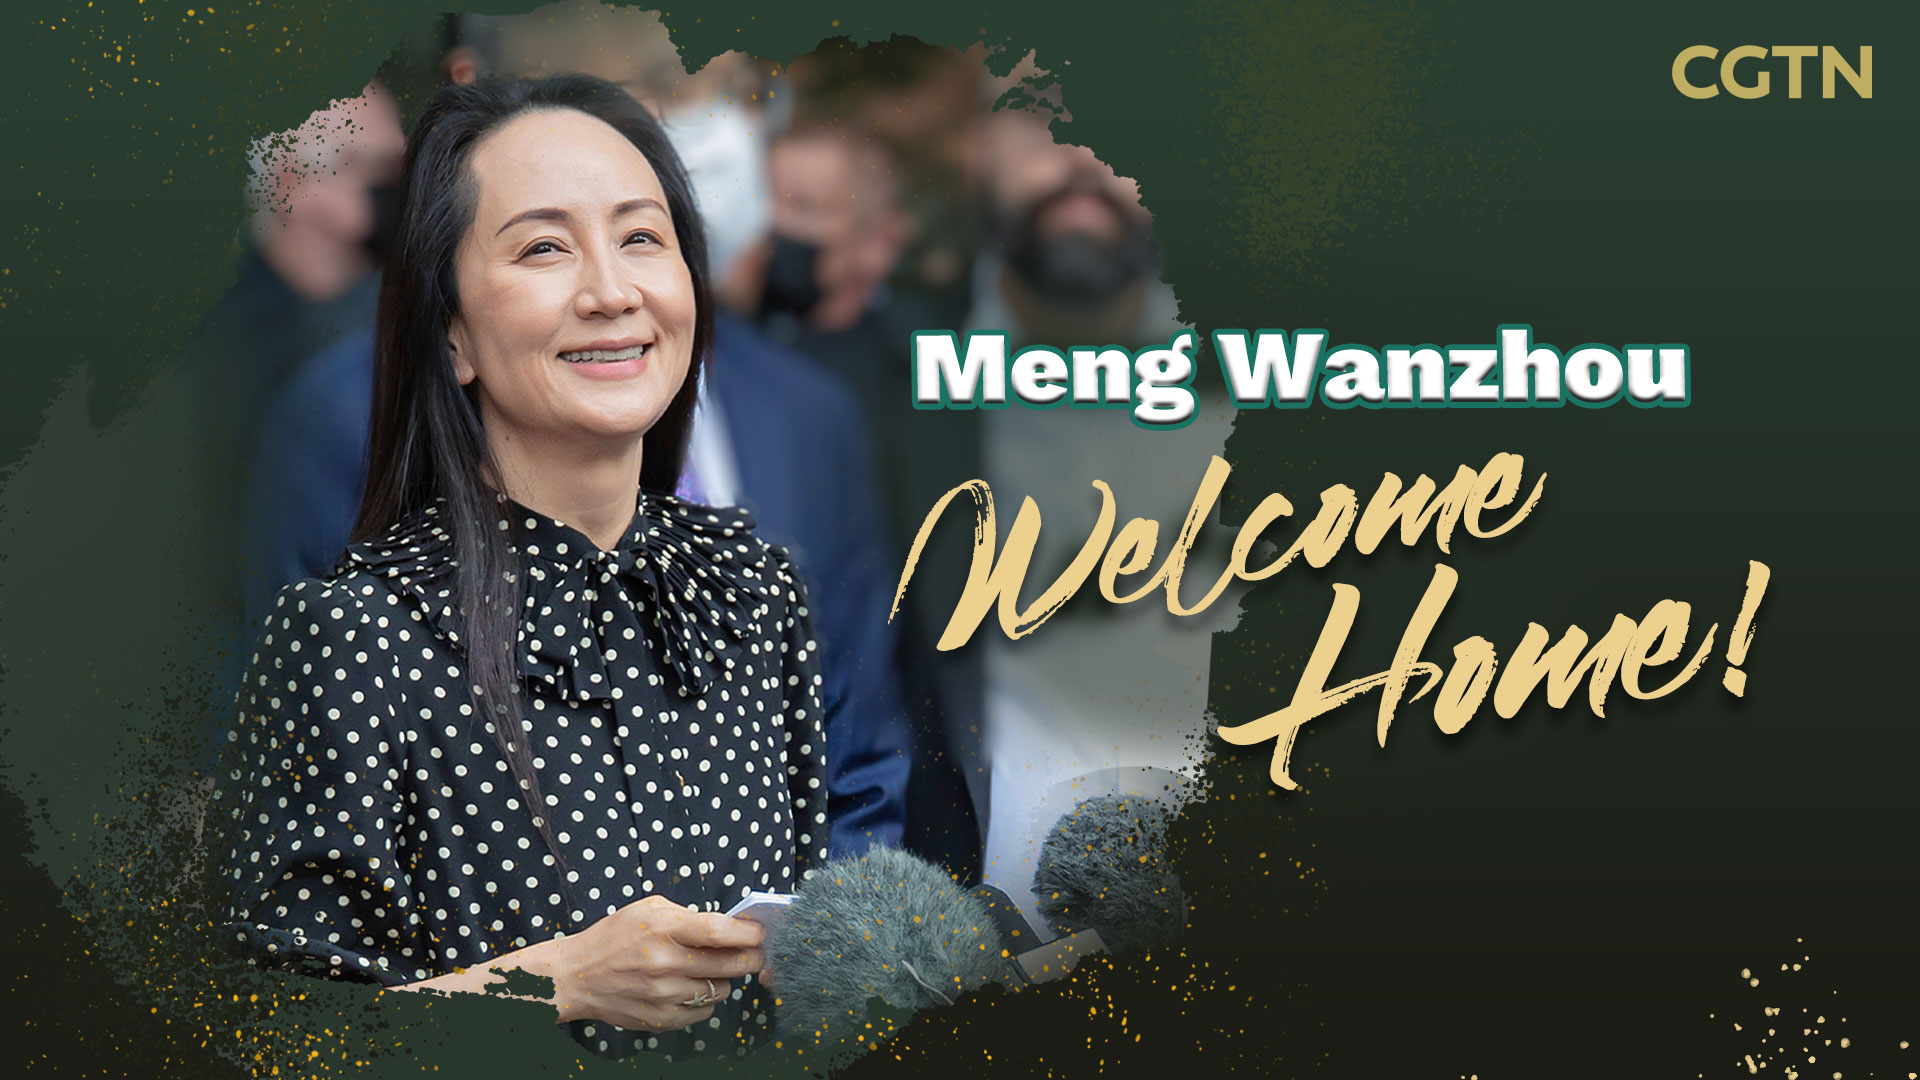 Meng Wanzhou back in China after 3 years of detention in Canada - CGTN